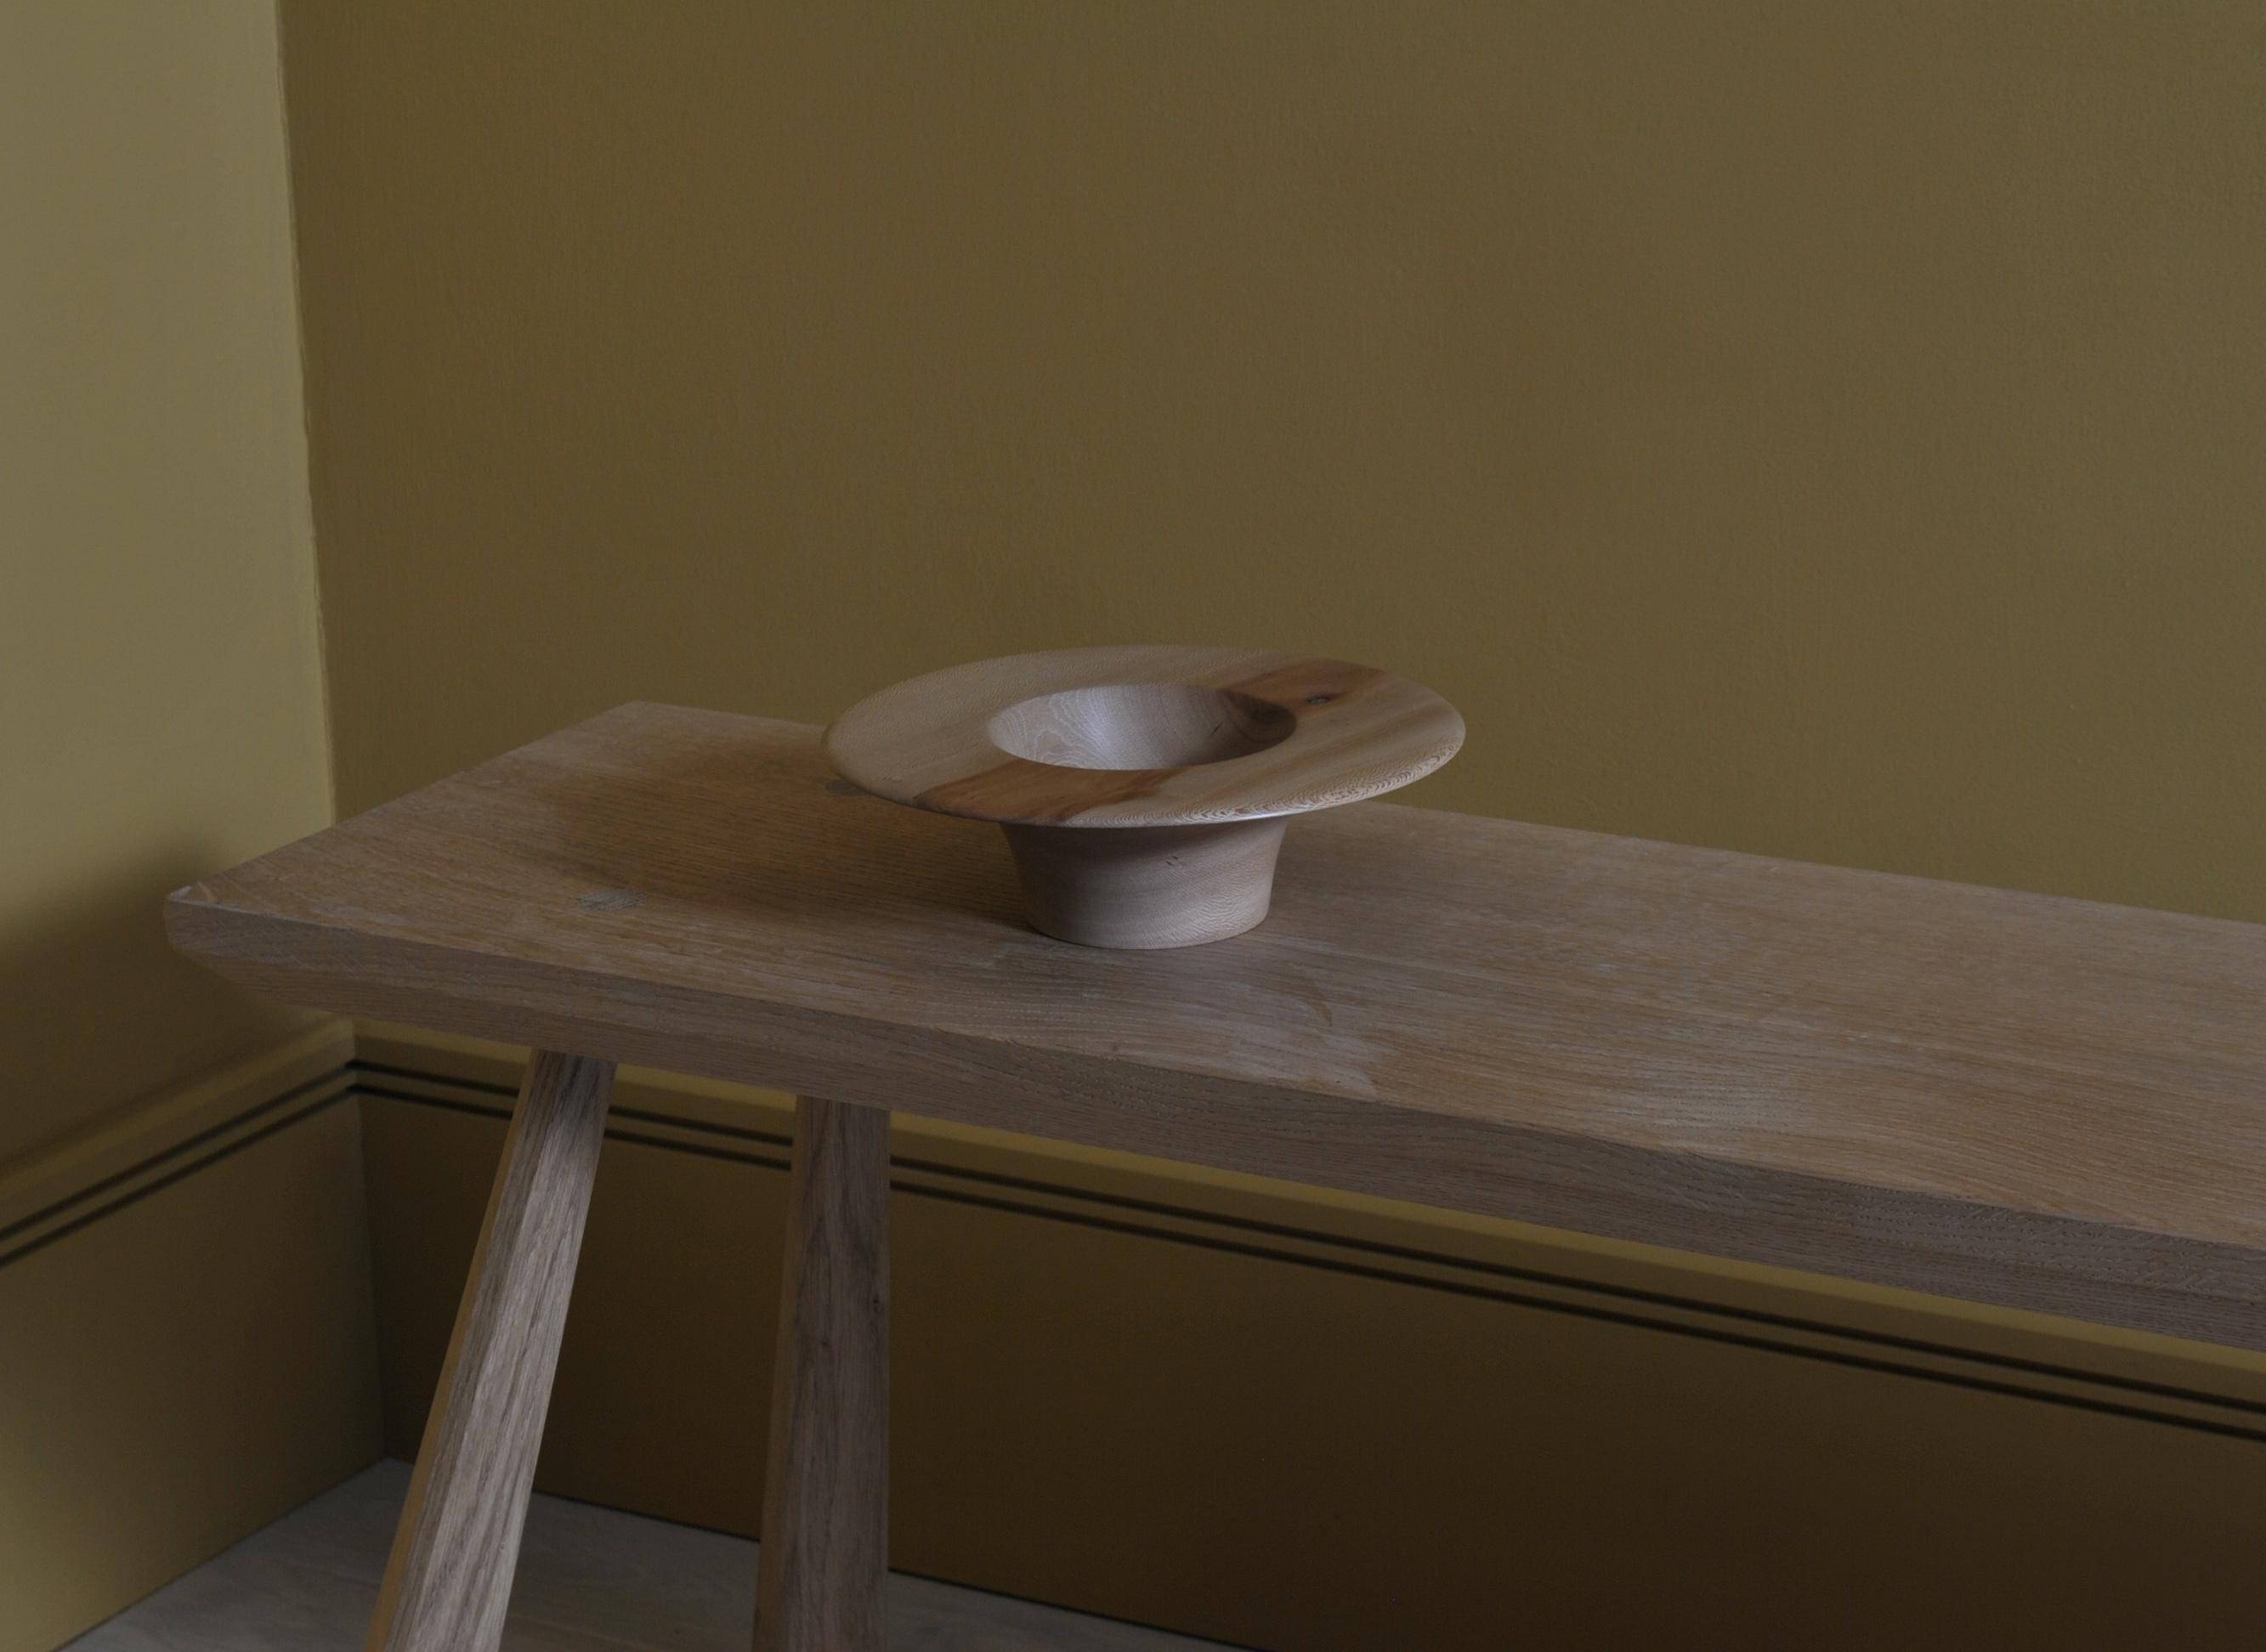 Contemporary Handcrafted Turned London Plane Bowl For Sale